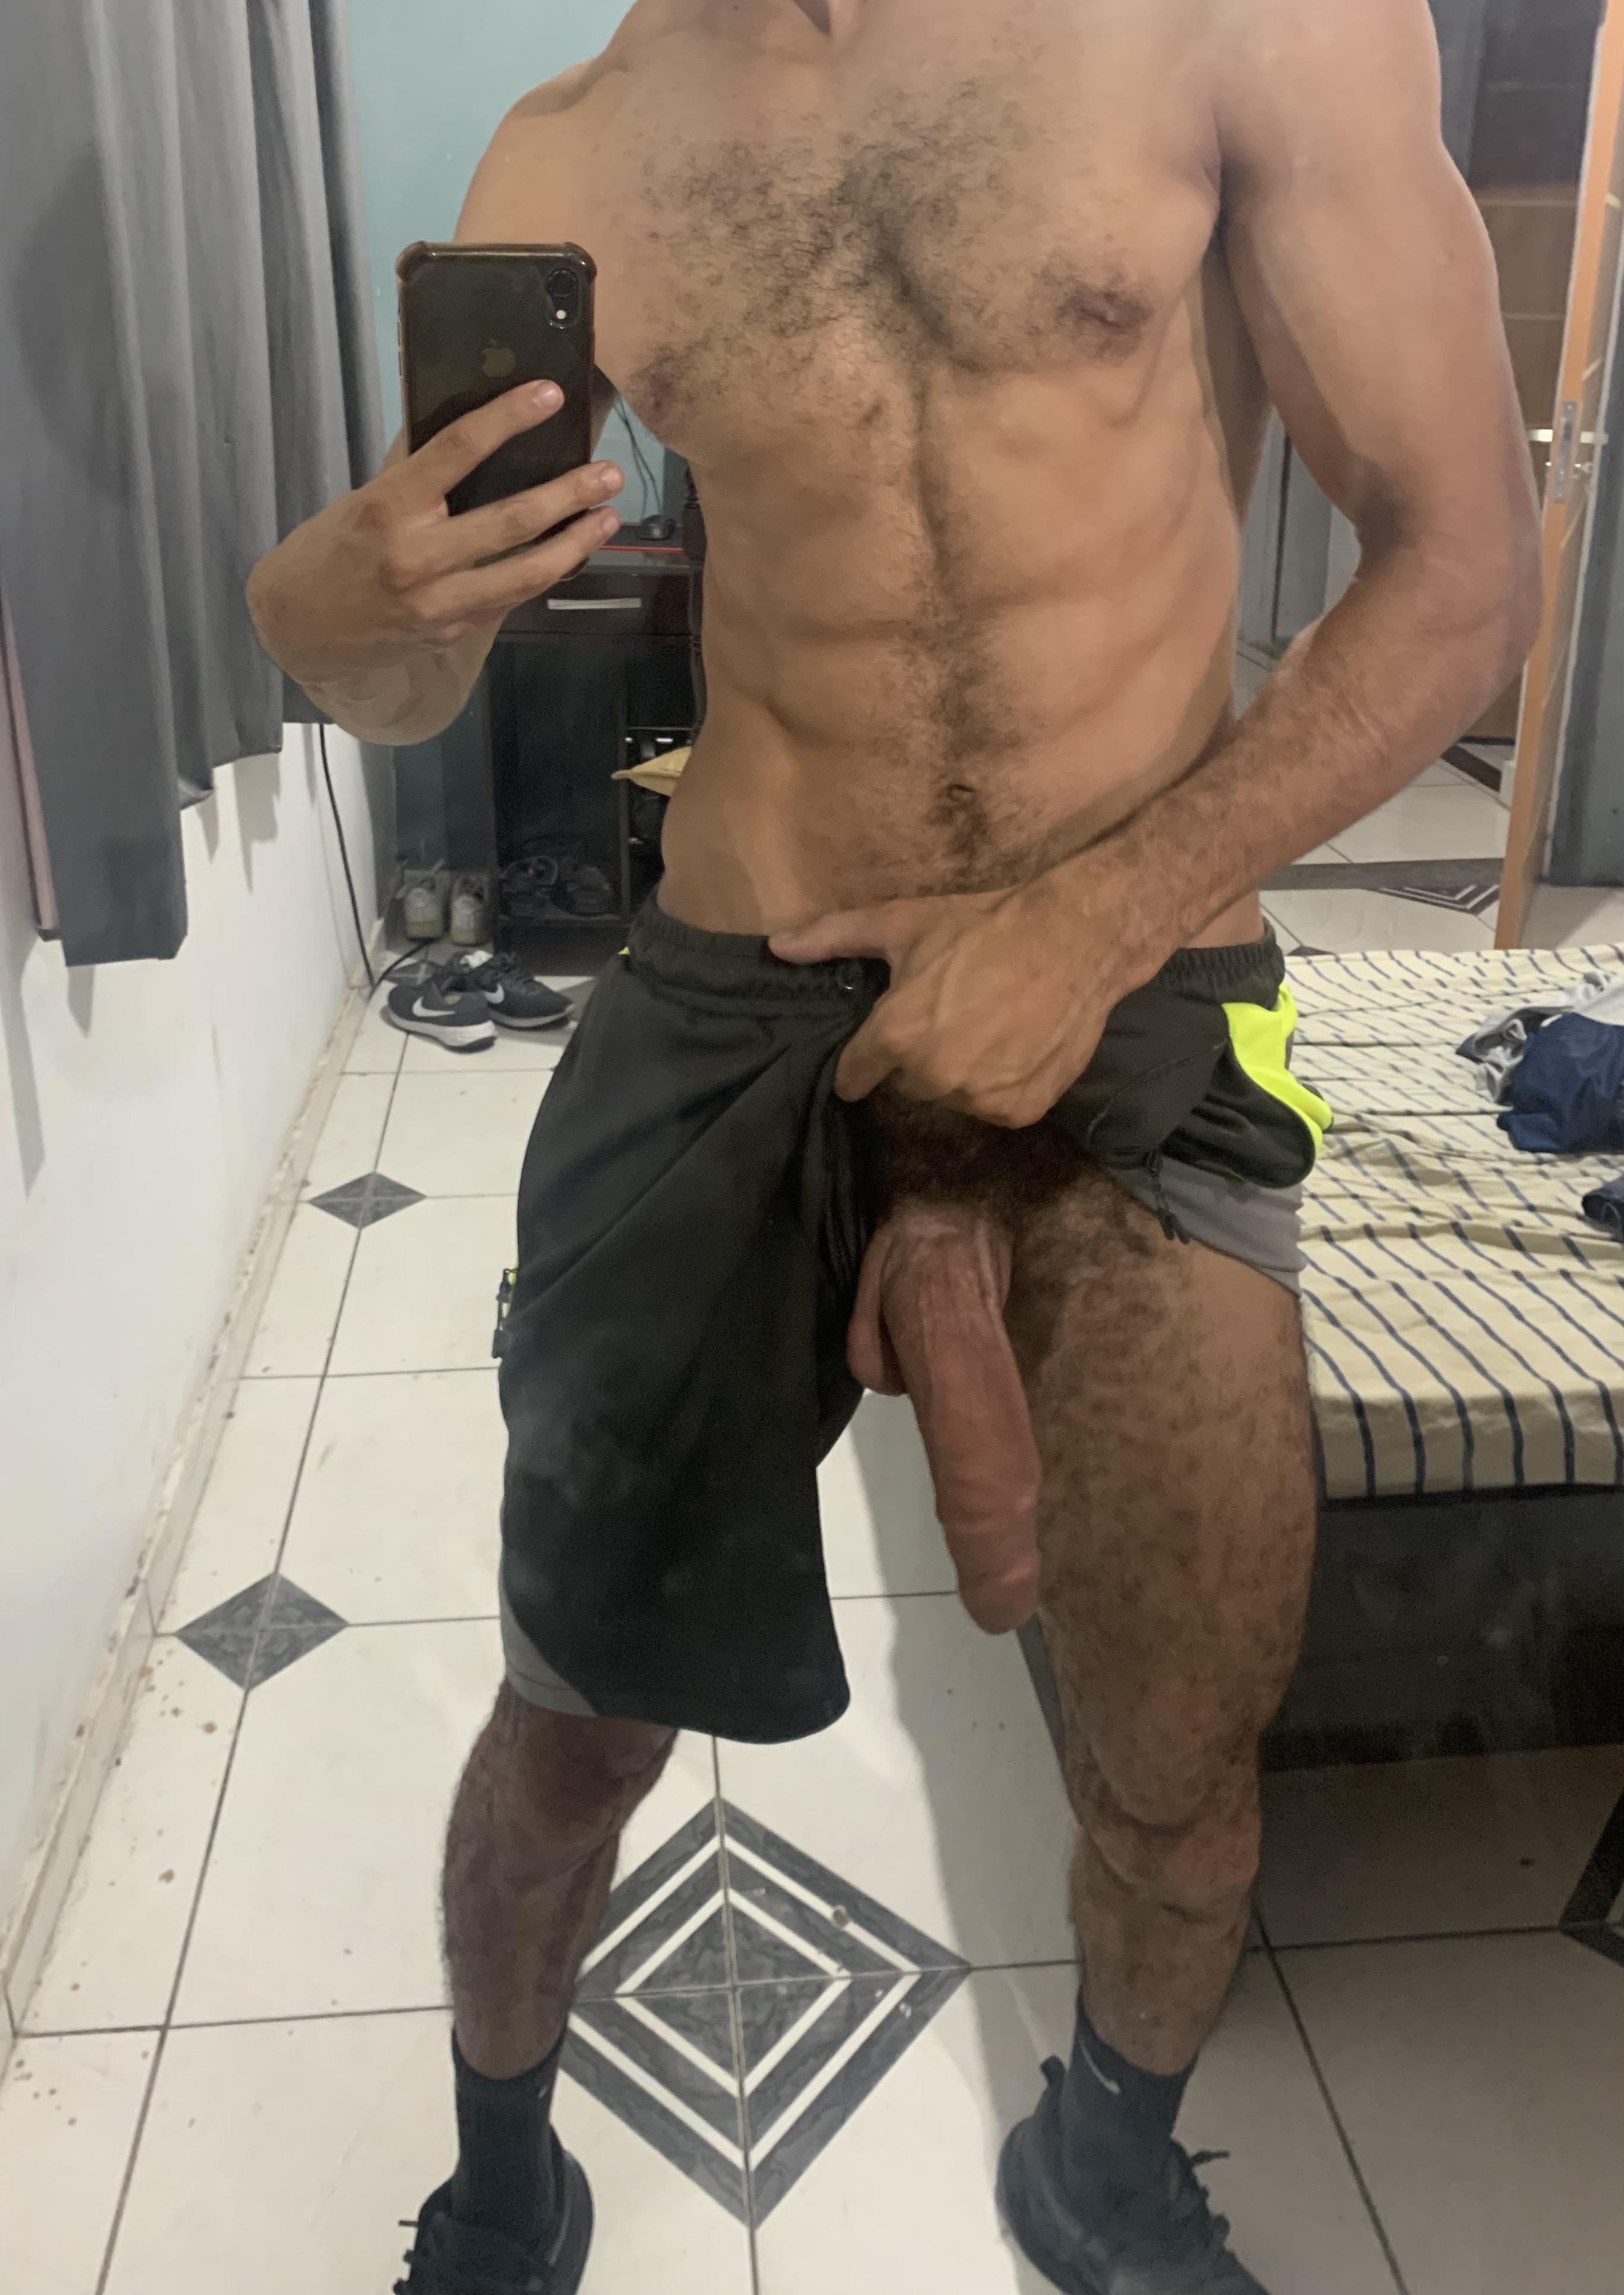 Huge hairy monster cock free without underwear after workout